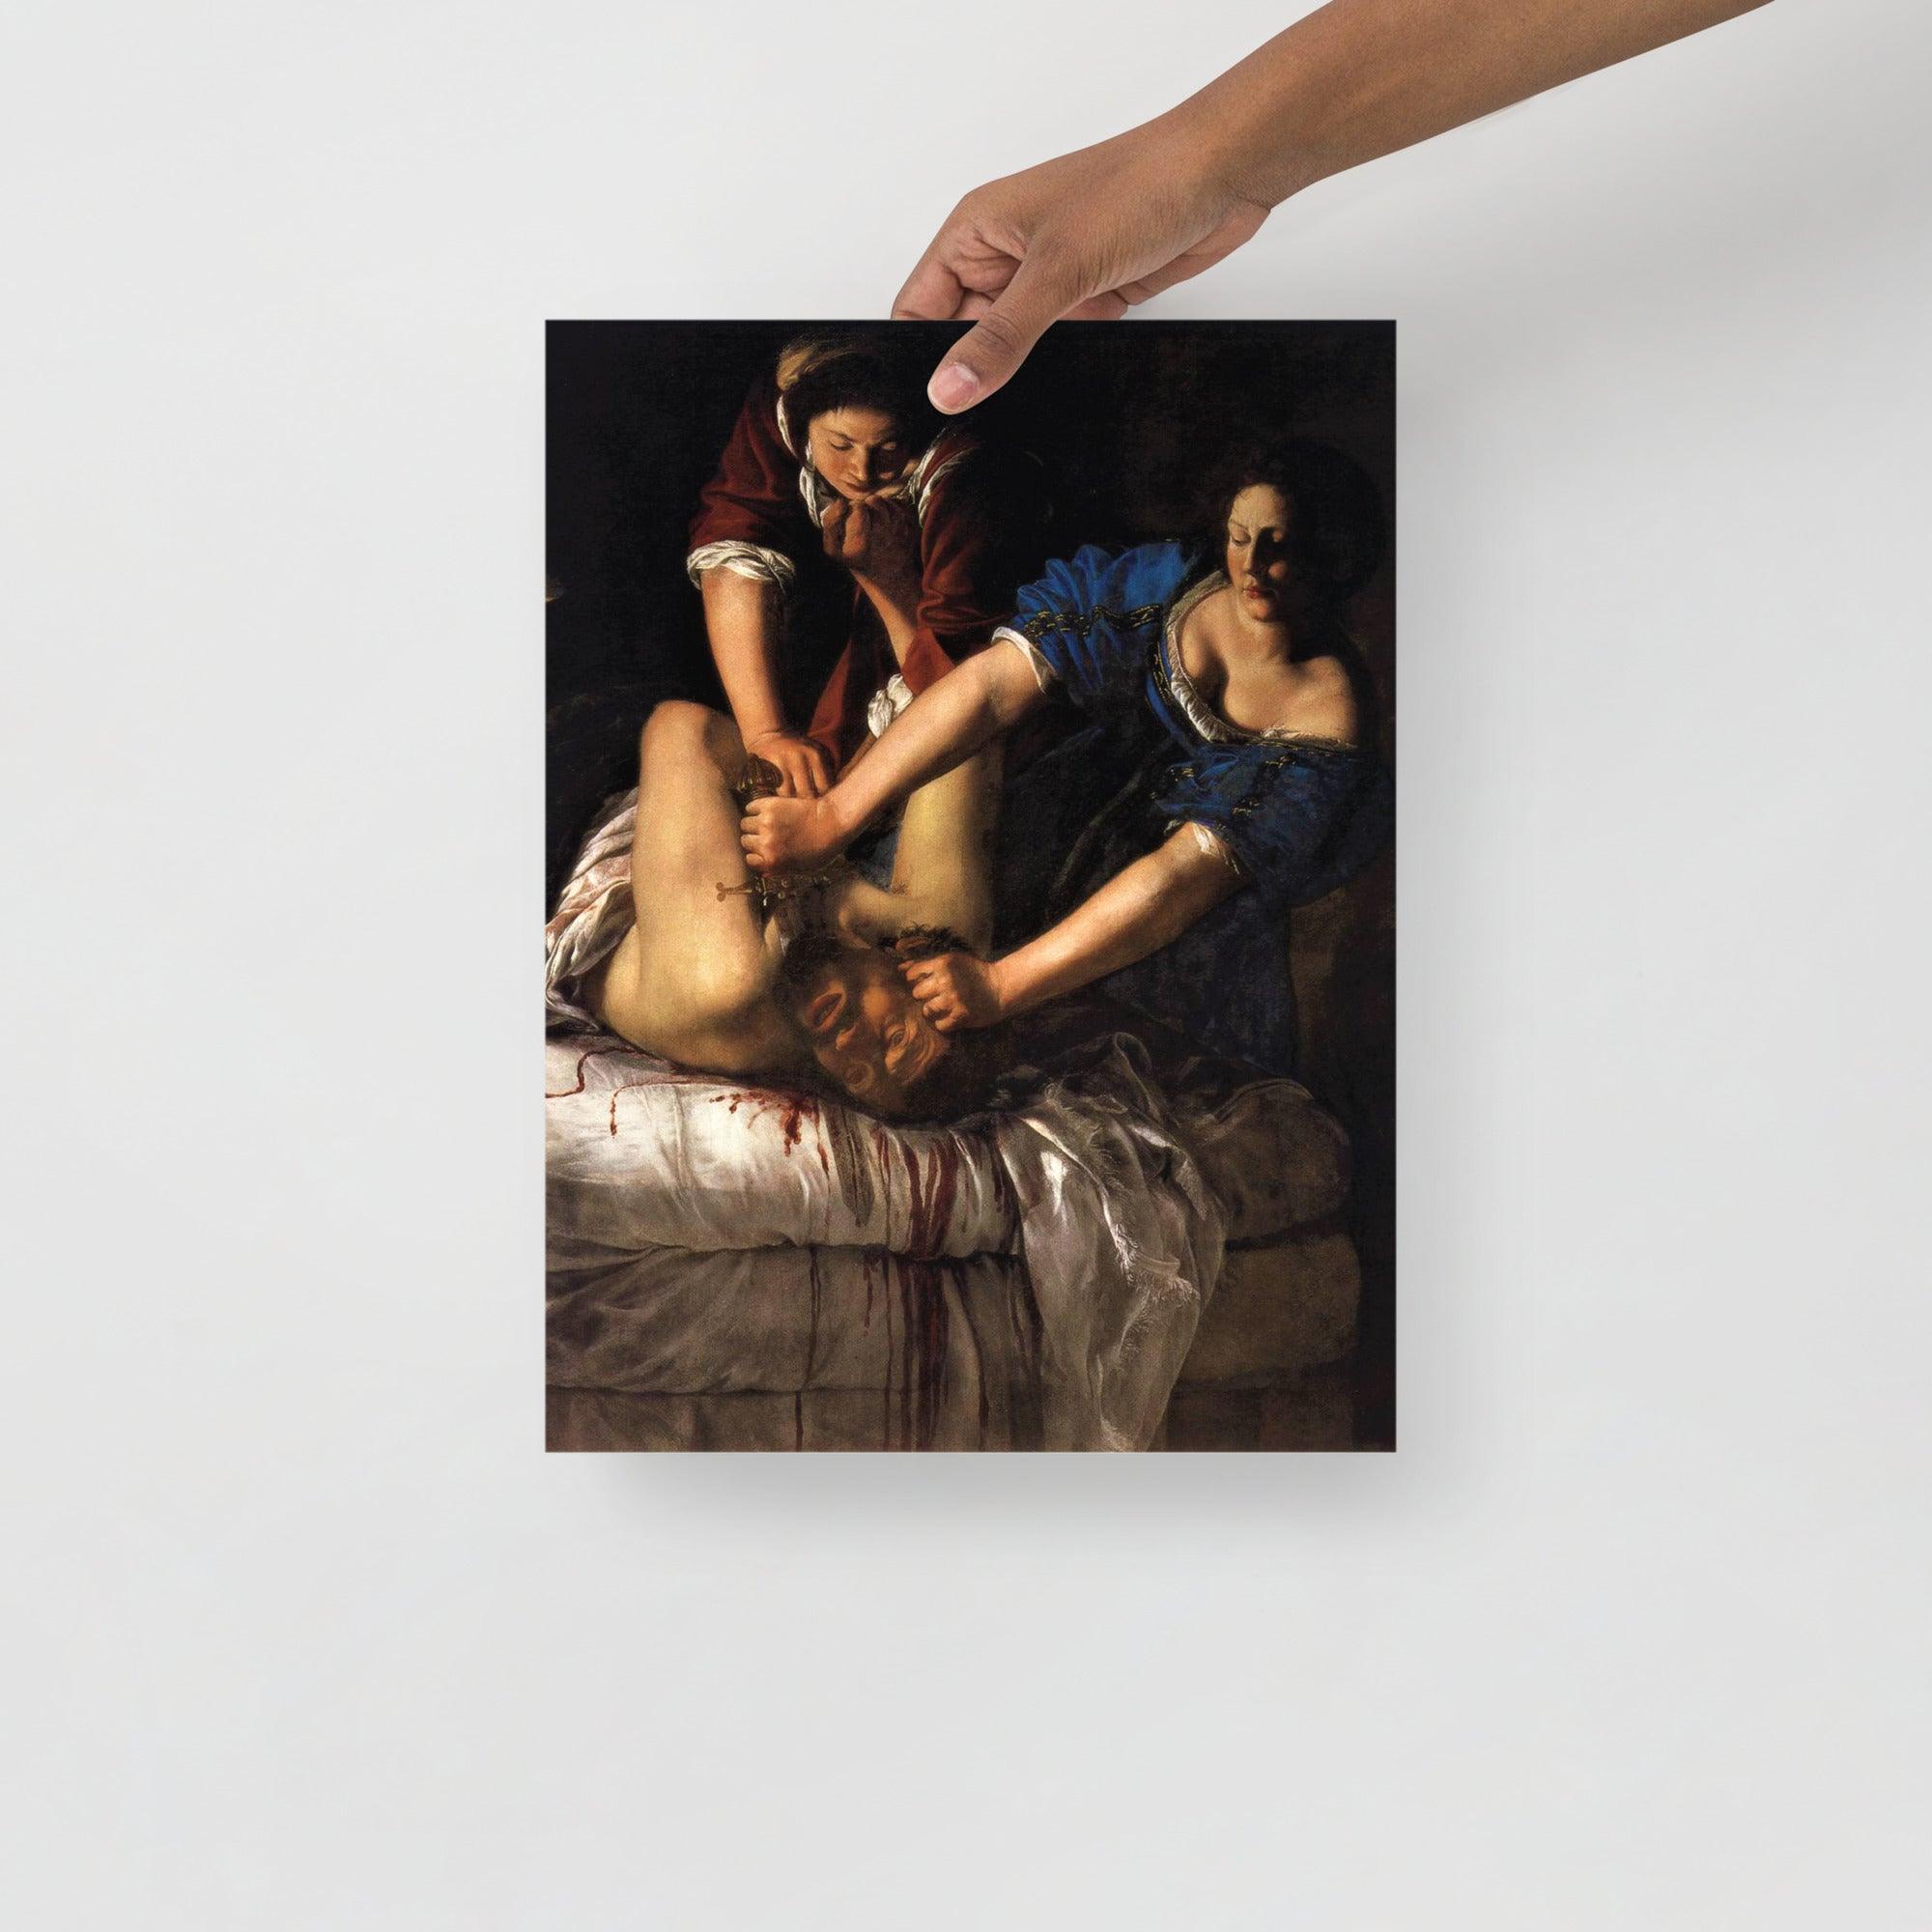 A Judith beheading Holofernes by Artemisia Gentileschi poster on a plain backdrop in size 12x16”.